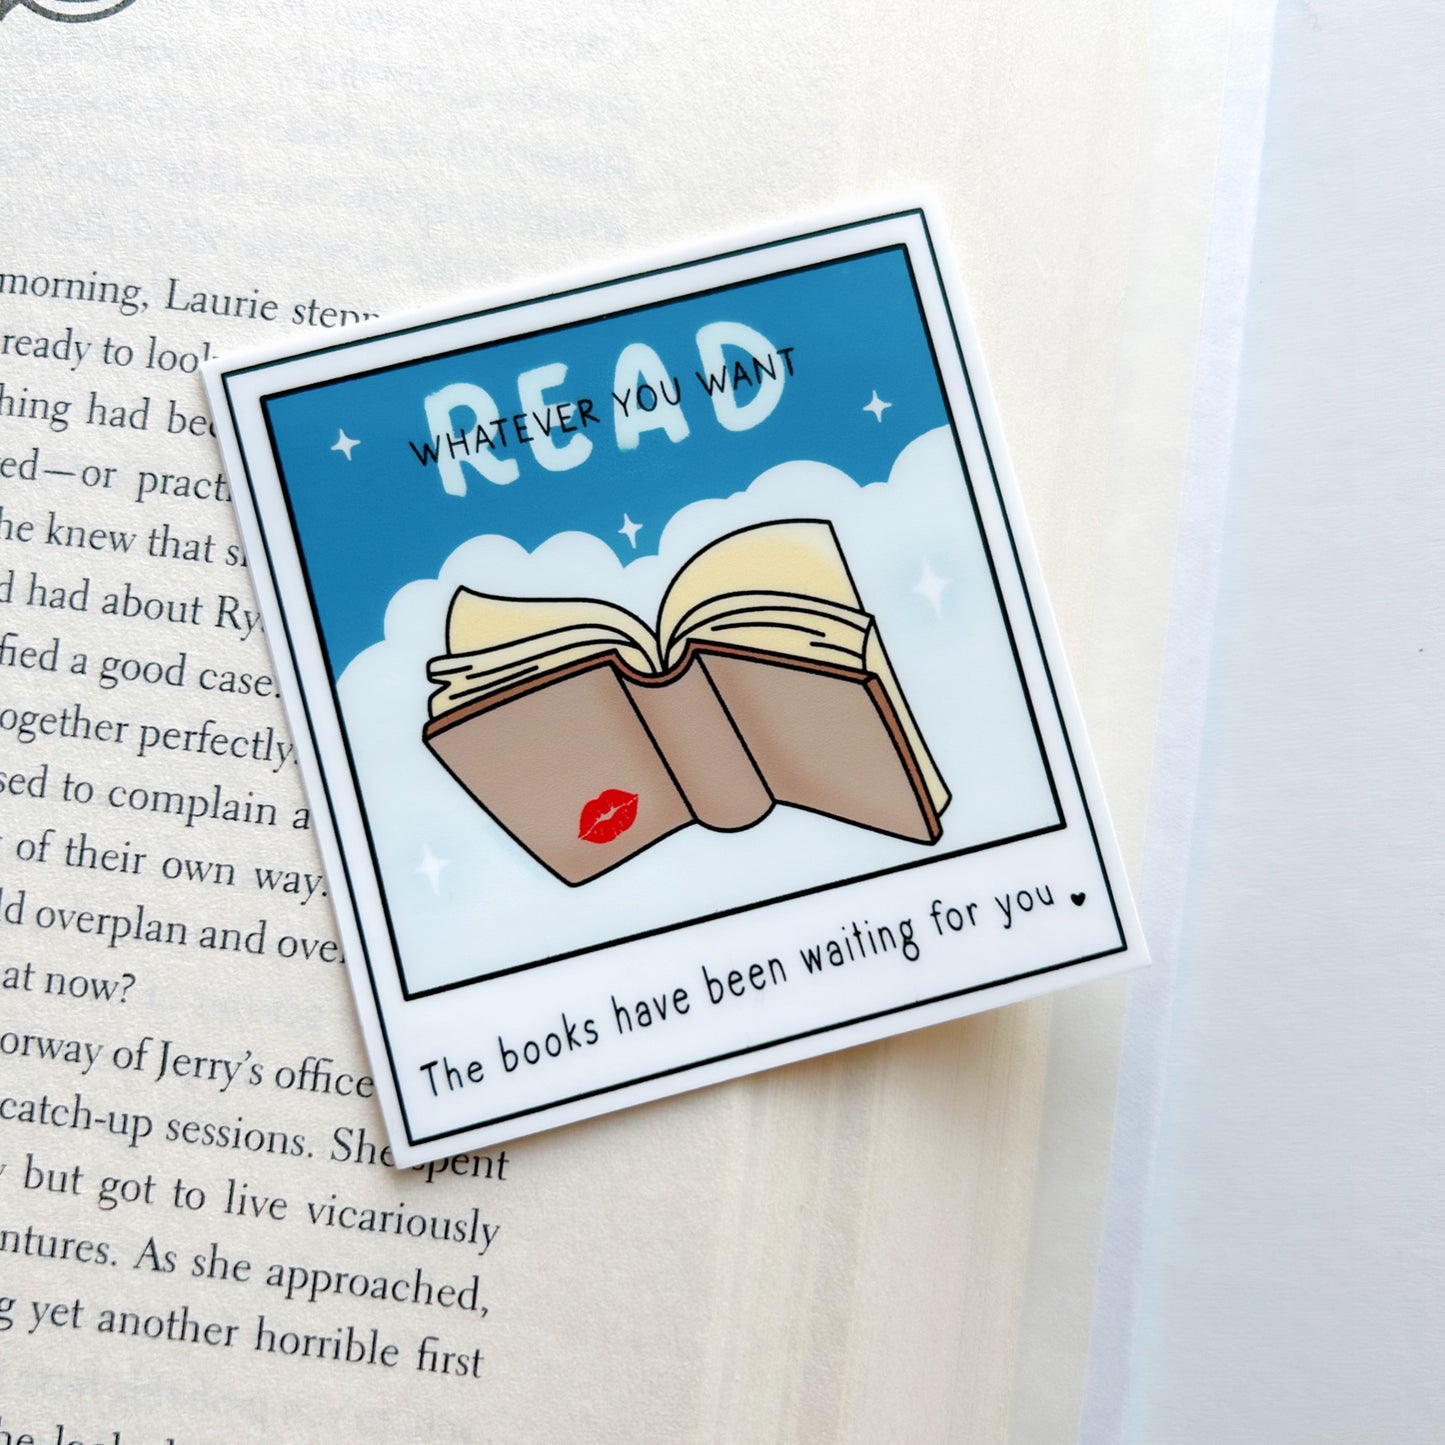 Read Whatever You Want Sticker